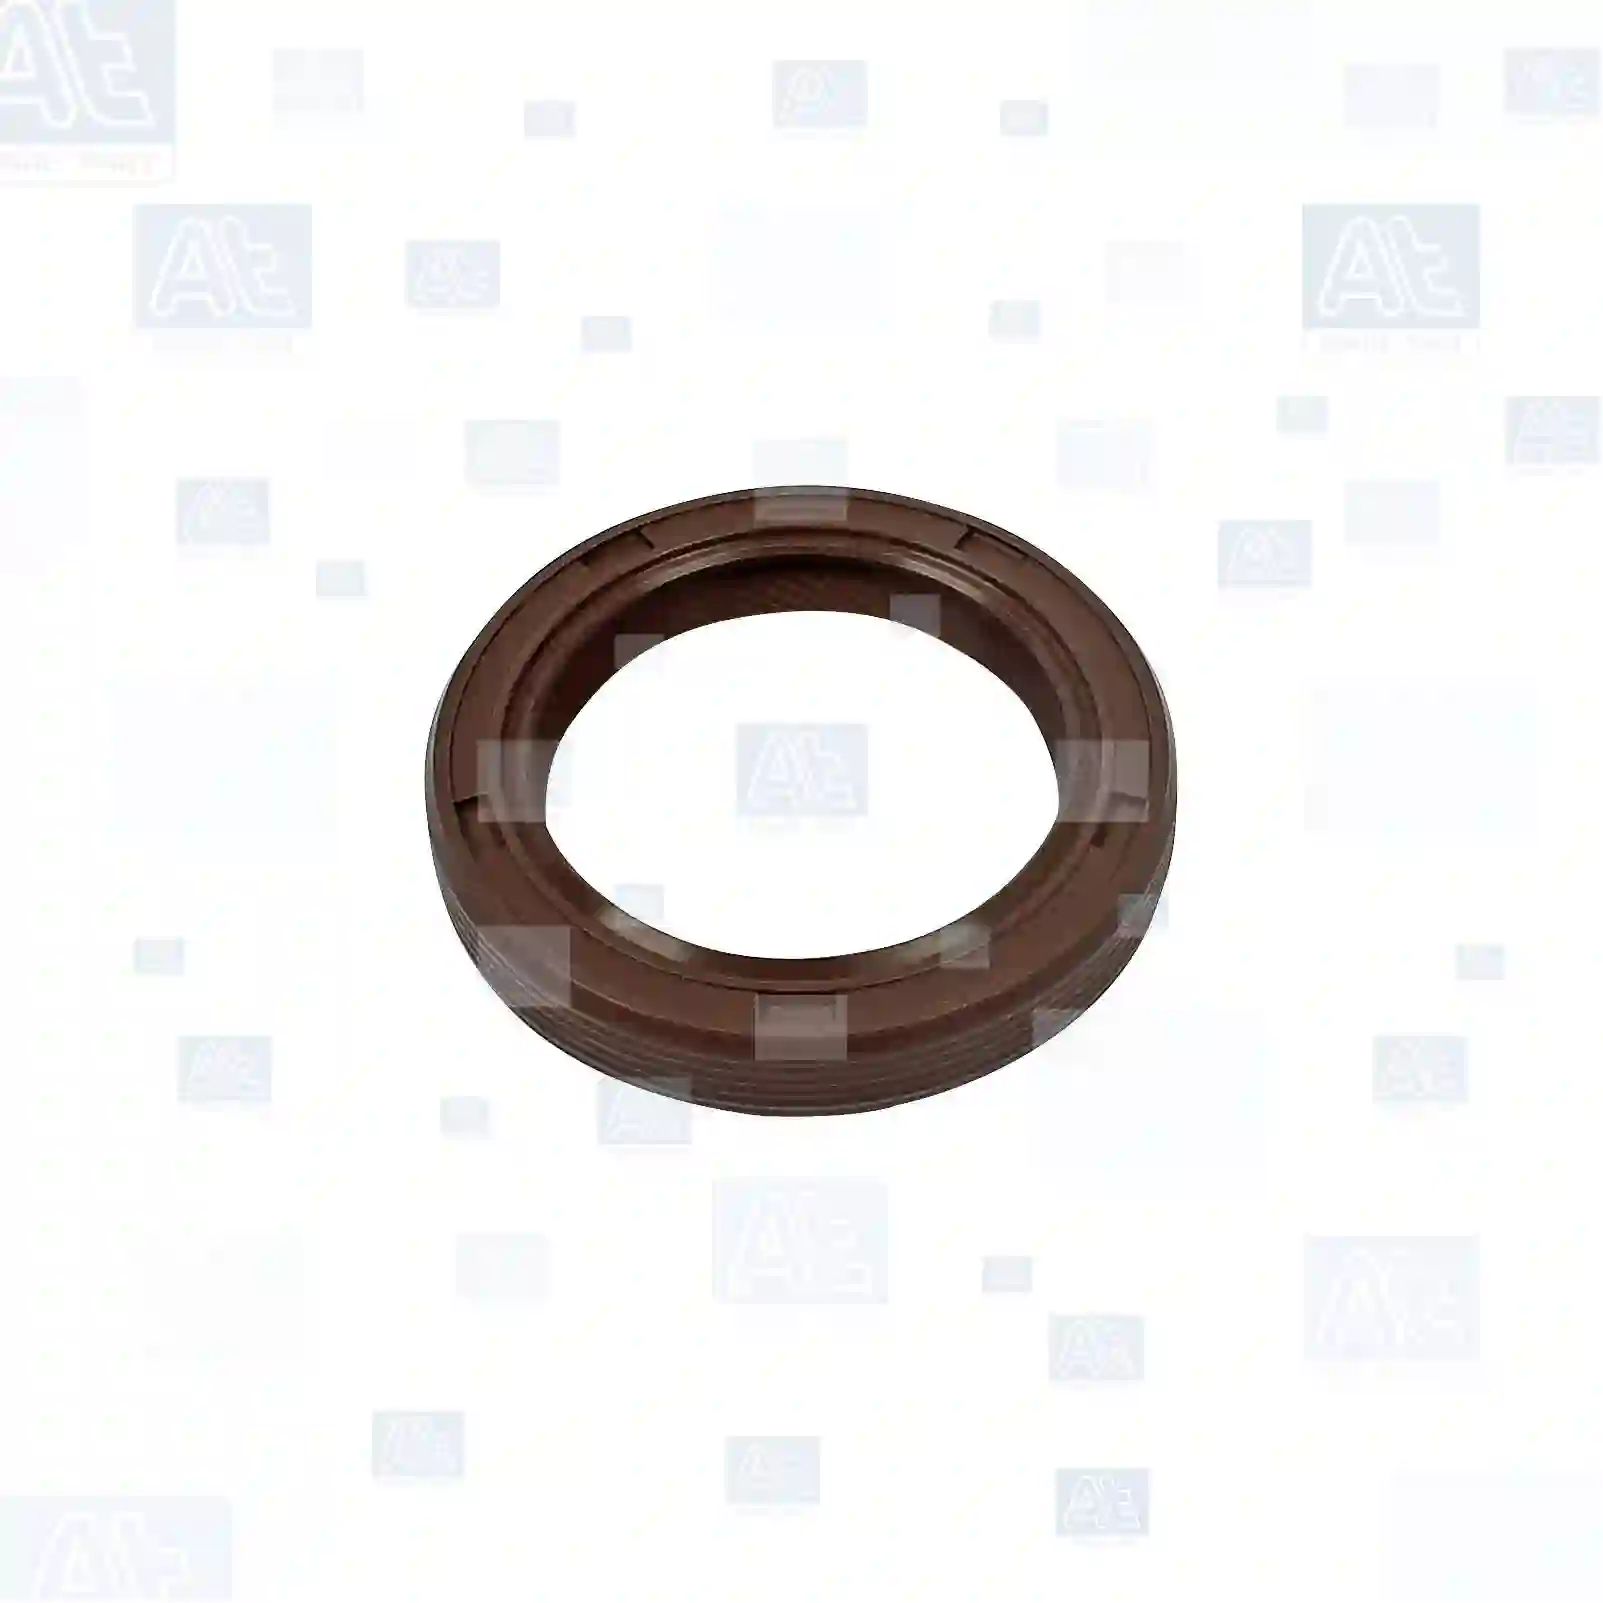 Oil seal, camshaft, at no 77701668, oem no: 55196124, 55196125, 60805718, 60809849, 71753052, 23111228314, 07604177, 55196124, 55196125, 60805718, 60809849, 71753052, 9111521, 9201464, 93178530, 22144-35504, 22144-39000, 22144-39001, 07604177, 07604178, 55196124, 55196125, 60805718, 60809849, 71753052, 4403521, 4506052, 649967, 7700743160, 7700747291, 7700749395, 93178530, 12746-79J50 At Spare Part | Engine, Accelerator Pedal, Camshaft, Connecting Rod, Crankcase, Crankshaft, Cylinder Head, Engine Suspension Mountings, Exhaust Manifold, Exhaust Gas Recirculation, Filter Kits, Flywheel Housing, General Overhaul Kits, Engine, Intake Manifold, Oil Cleaner, Oil Cooler, Oil Filter, Oil Pump, Oil Sump, Piston & Liner, Sensor & Switch, Timing Case, Turbocharger, Cooling System, Belt Tensioner, Coolant Filter, Coolant Pipe, Corrosion Prevention Agent, Drive, Expansion Tank, Fan, Intercooler, Monitors & Gauges, Radiator, Thermostat, V-Belt / Timing belt, Water Pump, Fuel System, Electronical Injector Unit, Feed Pump, Fuel Filter, cpl., Fuel Gauge Sender,  Fuel Line, Fuel Pump, Fuel Tank, Injection Line Kit, Injection Pump, Exhaust System, Clutch & Pedal, Gearbox, Propeller Shaft, Axles, Brake System, Hubs & Wheels, Suspension, Leaf Spring, Universal Parts / Accessories, Steering, Electrical System, Cabin Oil seal, camshaft, at no 77701668, oem no: 55196124, 55196125, 60805718, 60809849, 71753052, 23111228314, 07604177, 55196124, 55196125, 60805718, 60809849, 71753052, 9111521, 9201464, 93178530, 22144-35504, 22144-39000, 22144-39001, 07604177, 07604178, 55196124, 55196125, 60805718, 60809849, 71753052, 4403521, 4506052, 649967, 7700743160, 7700747291, 7700749395, 93178530, 12746-79J50 At Spare Part | Engine, Accelerator Pedal, Camshaft, Connecting Rod, Crankcase, Crankshaft, Cylinder Head, Engine Suspension Mountings, Exhaust Manifold, Exhaust Gas Recirculation, Filter Kits, Flywheel Housing, General Overhaul Kits, Engine, Intake Manifold, Oil Cleaner, Oil Cooler, Oil Filter, Oil Pump, Oil Sump, Piston & Liner, Sensor & Switch, Timing Case, Turbocharger, Cooling System, Belt Tensioner, Coolant Filter, Coolant Pipe, Corrosion Prevention Agent, Drive, Expansion Tank, Fan, Intercooler, Monitors & Gauges, Radiator, Thermostat, V-Belt / Timing belt, Water Pump, Fuel System, Electronical Injector Unit, Feed Pump, Fuel Filter, cpl., Fuel Gauge Sender,  Fuel Line, Fuel Pump, Fuel Tank, Injection Line Kit, Injection Pump, Exhaust System, Clutch & Pedal, Gearbox, Propeller Shaft, Axles, Brake System, Hubs & Wheels, Suspension, Leaf Spring, Universal Parts / Accessories, Steering, Electrical System, Cabin